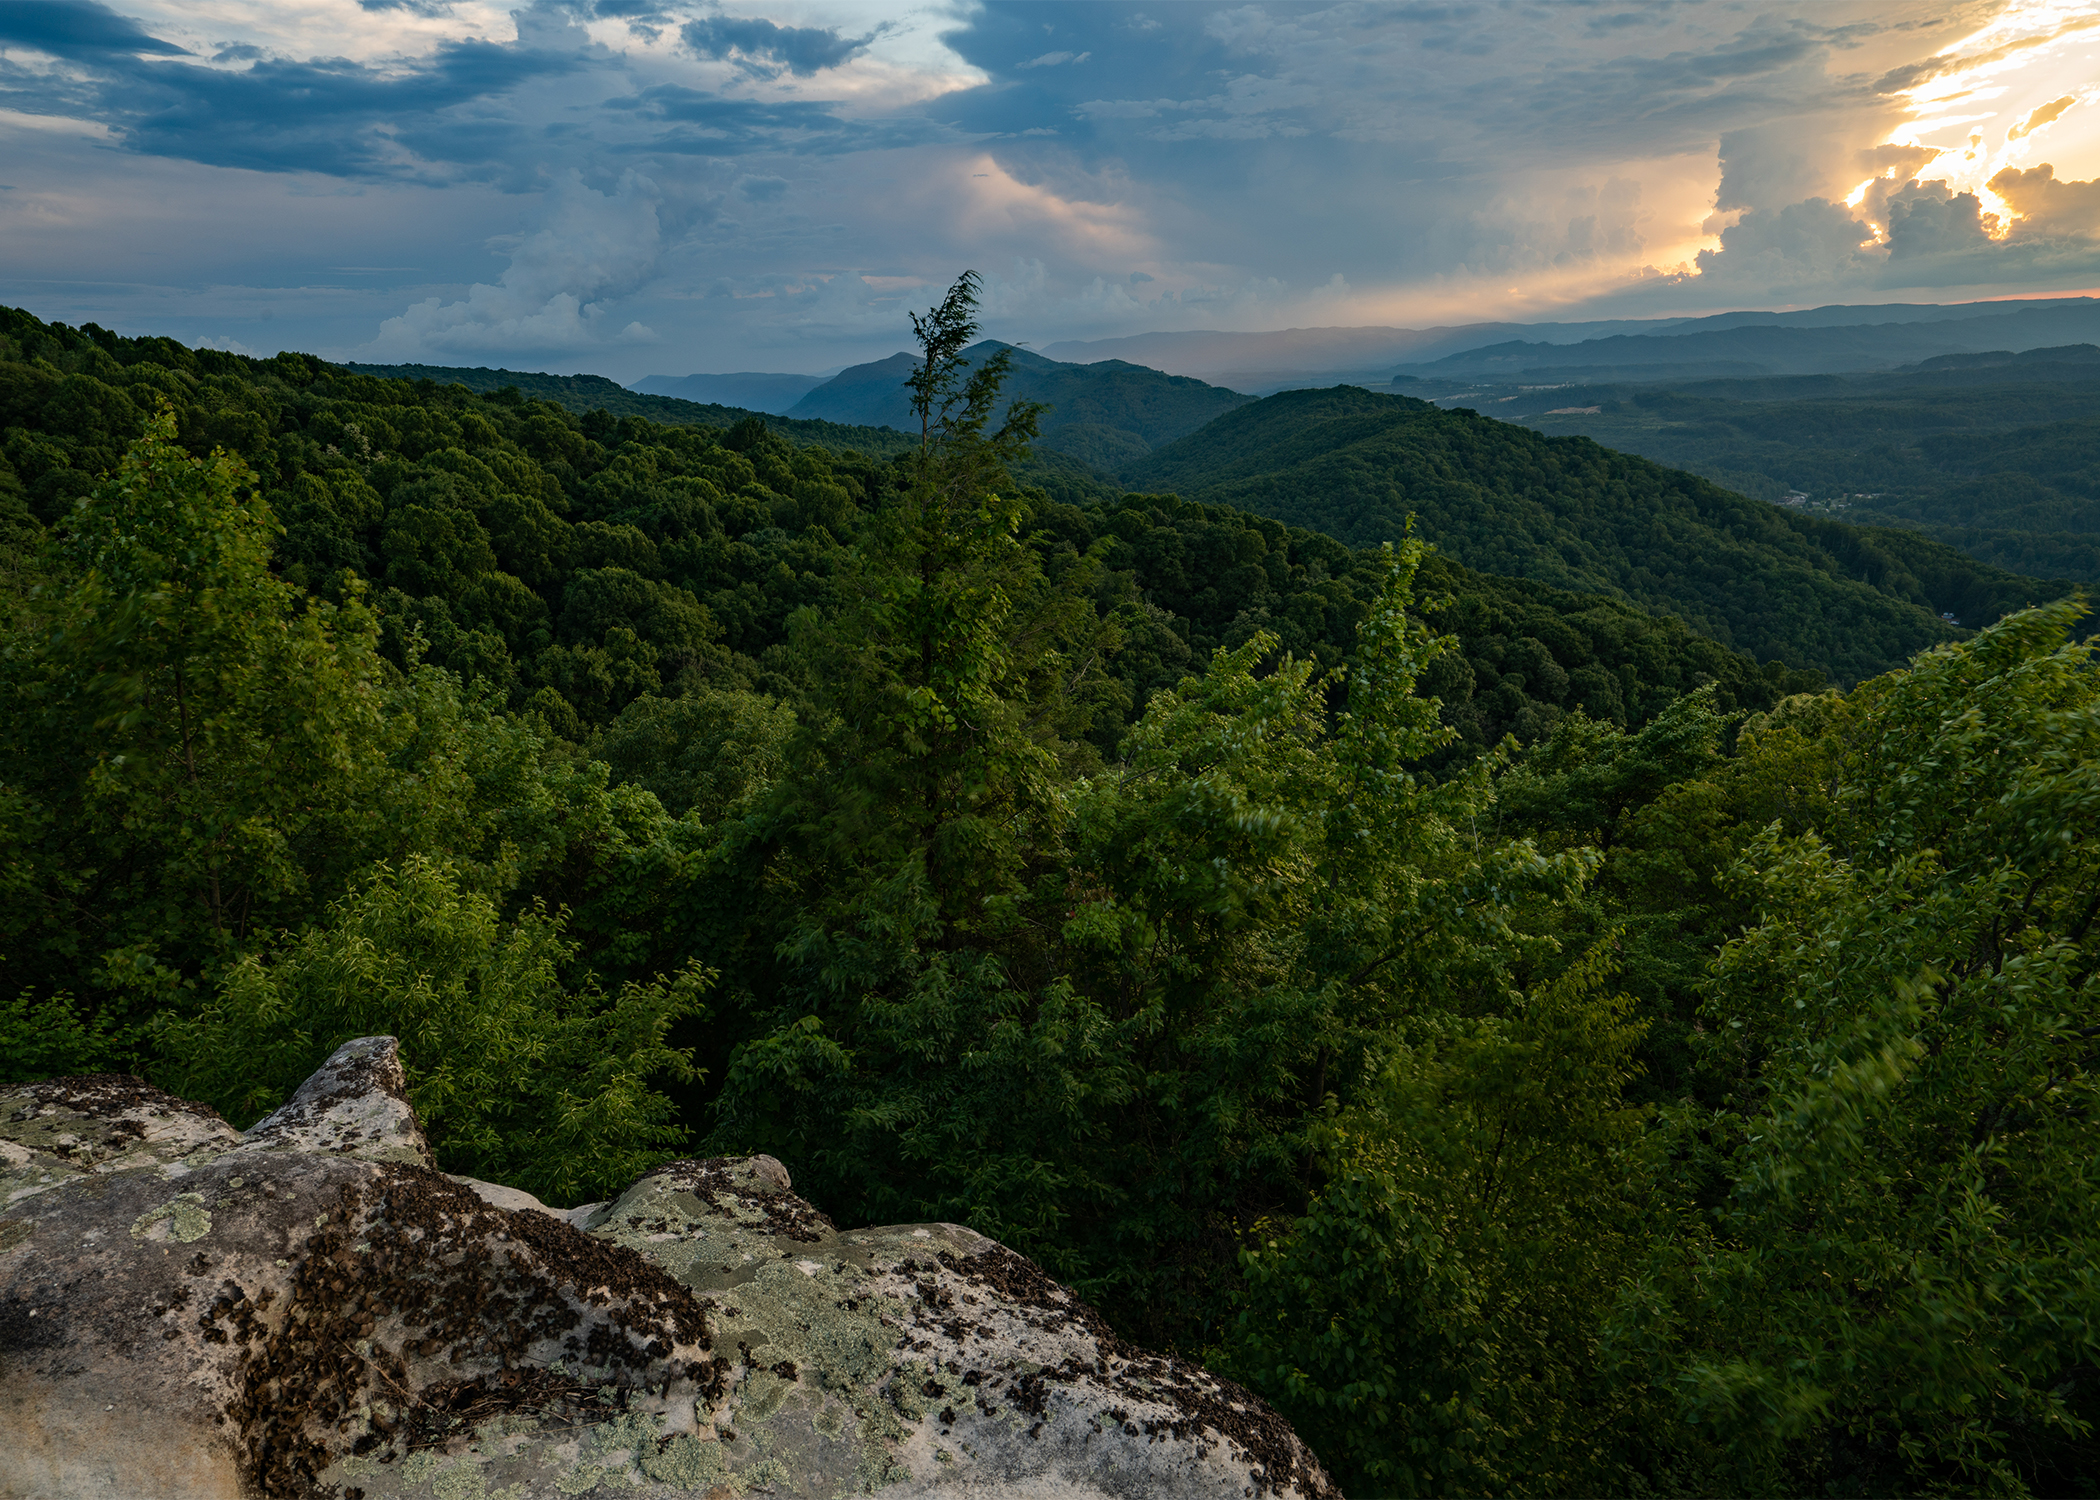 Sun setting over the Appalachian Mountains in Kentucky as seen from a bluff.